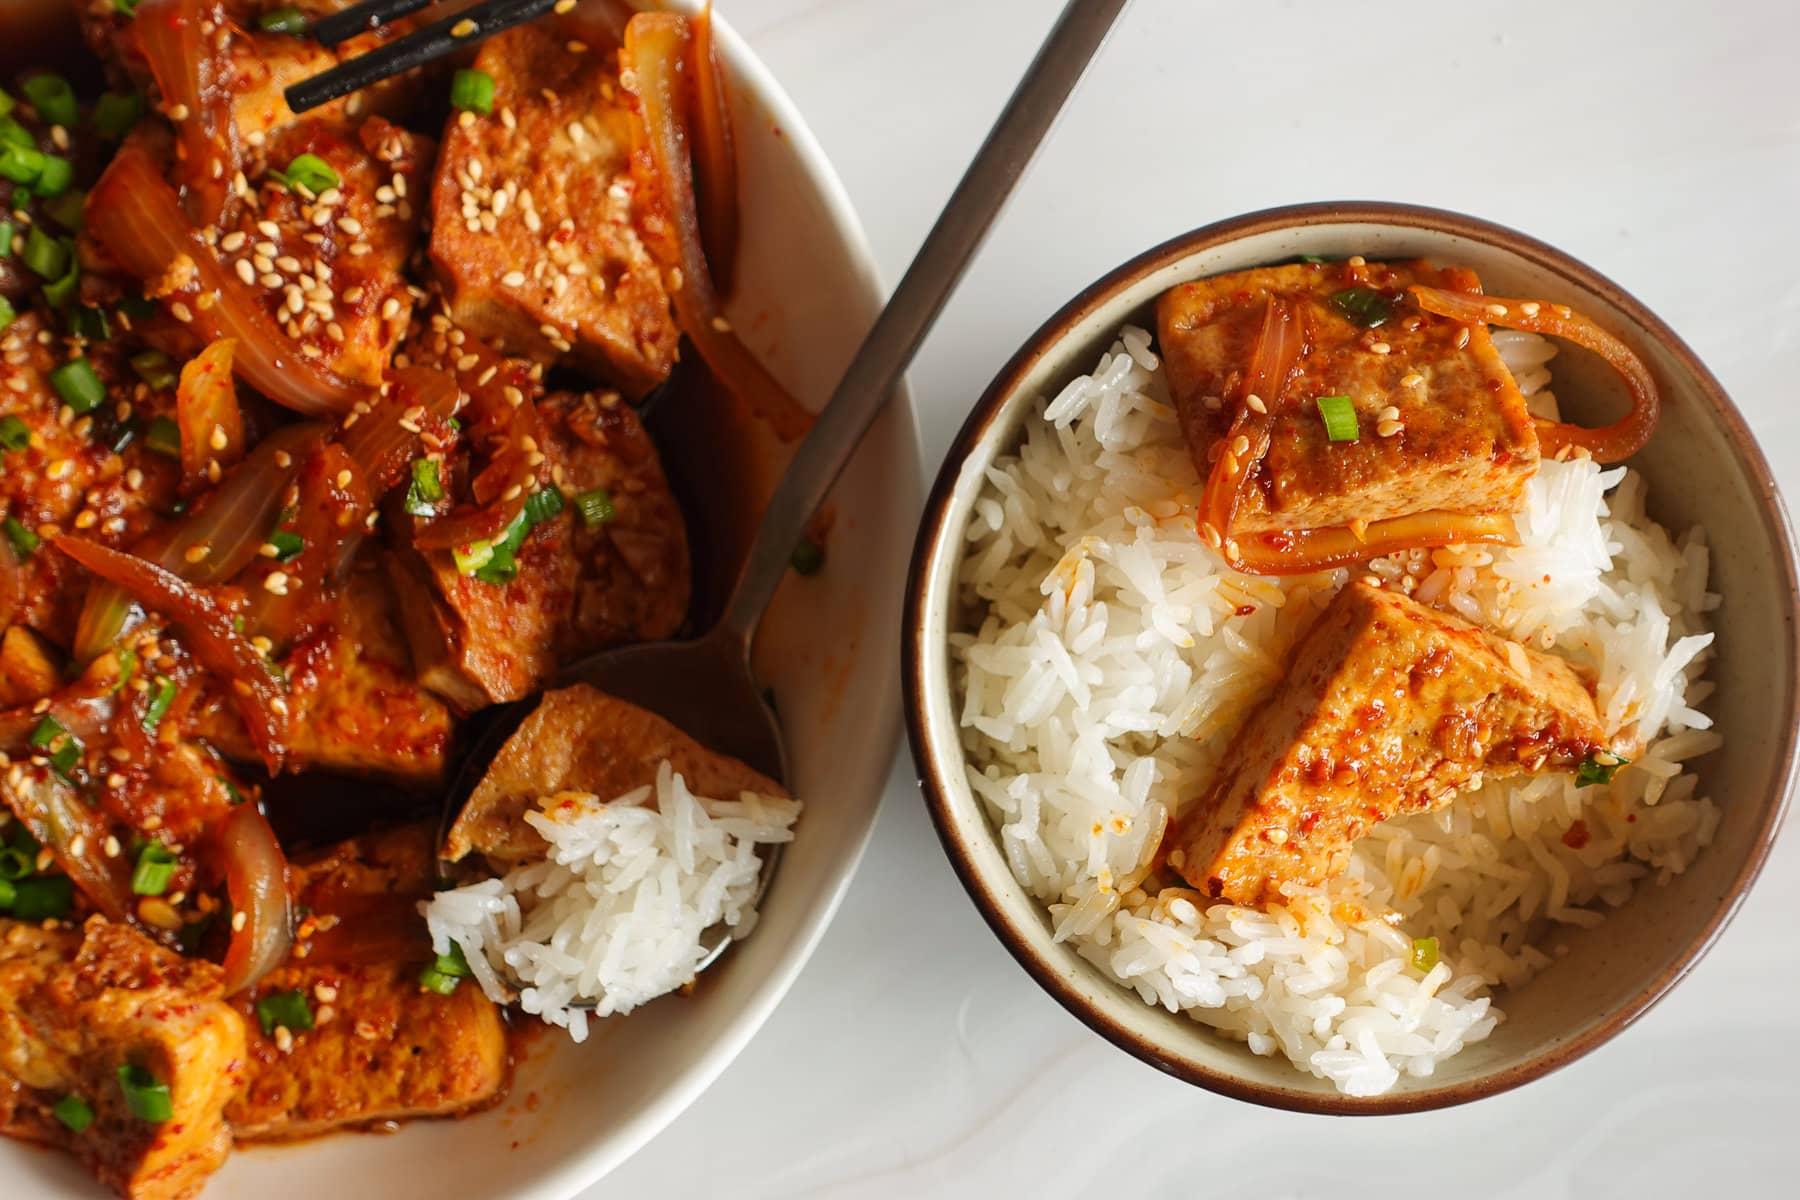 Serve the Korean braised tofu with a bowl of rice